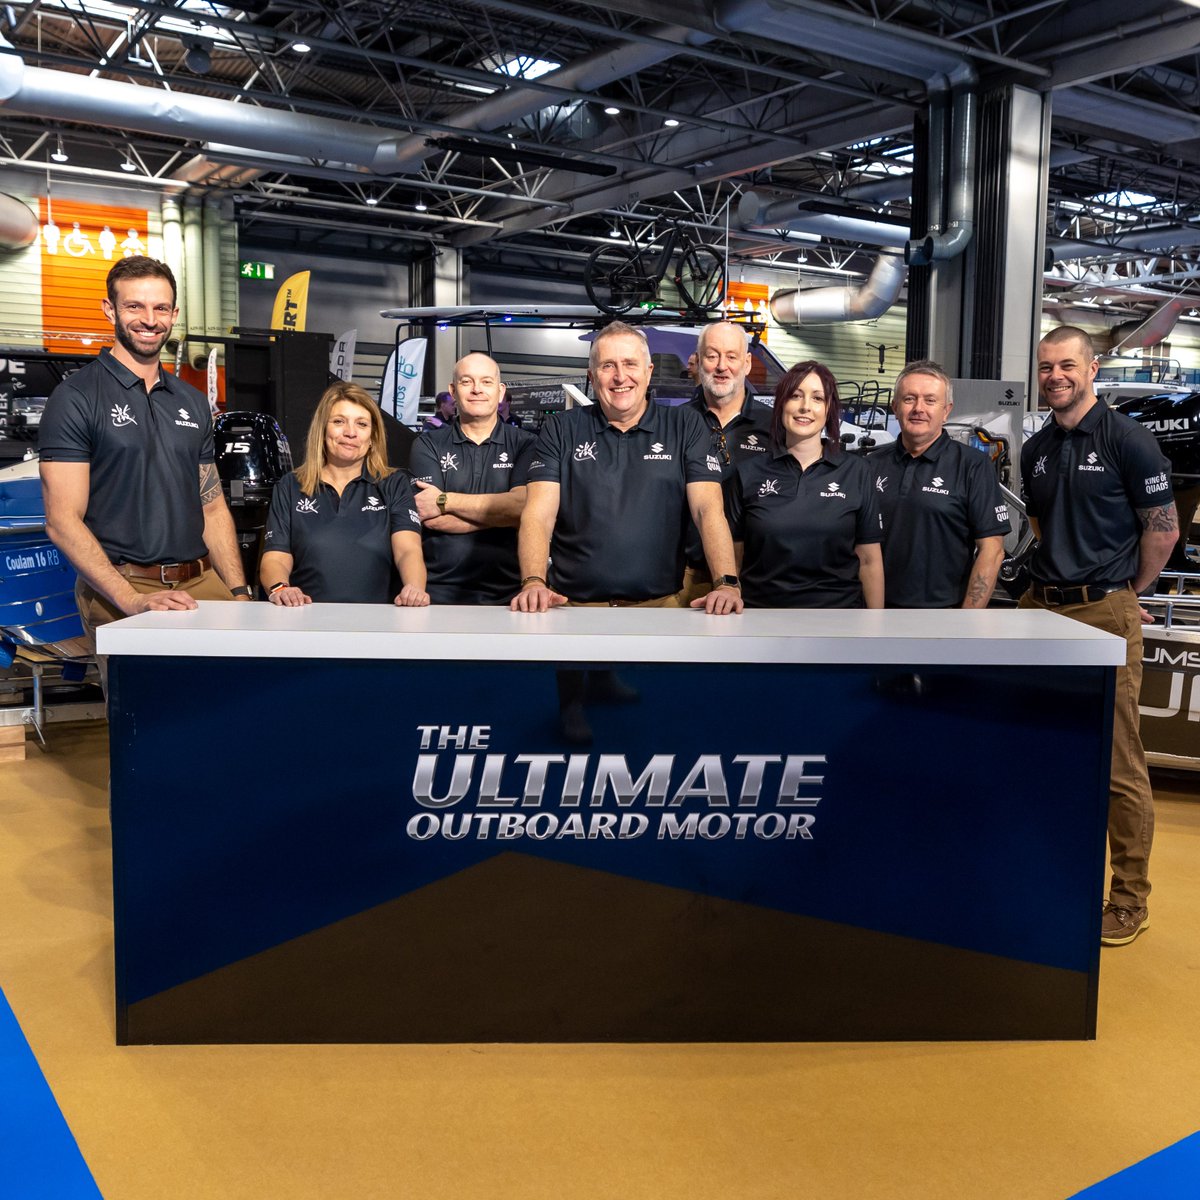 All set for the final day of @boatlifeevents Here's the team sporting their new show uniform polo shirts from OCEANR, which are all made from recycled plastic waste! ♻👍 #TheUltimateOutboardMotor #boatshows #sustainableclothing #akilofortheplanet #teamphoto #teamsuzuki